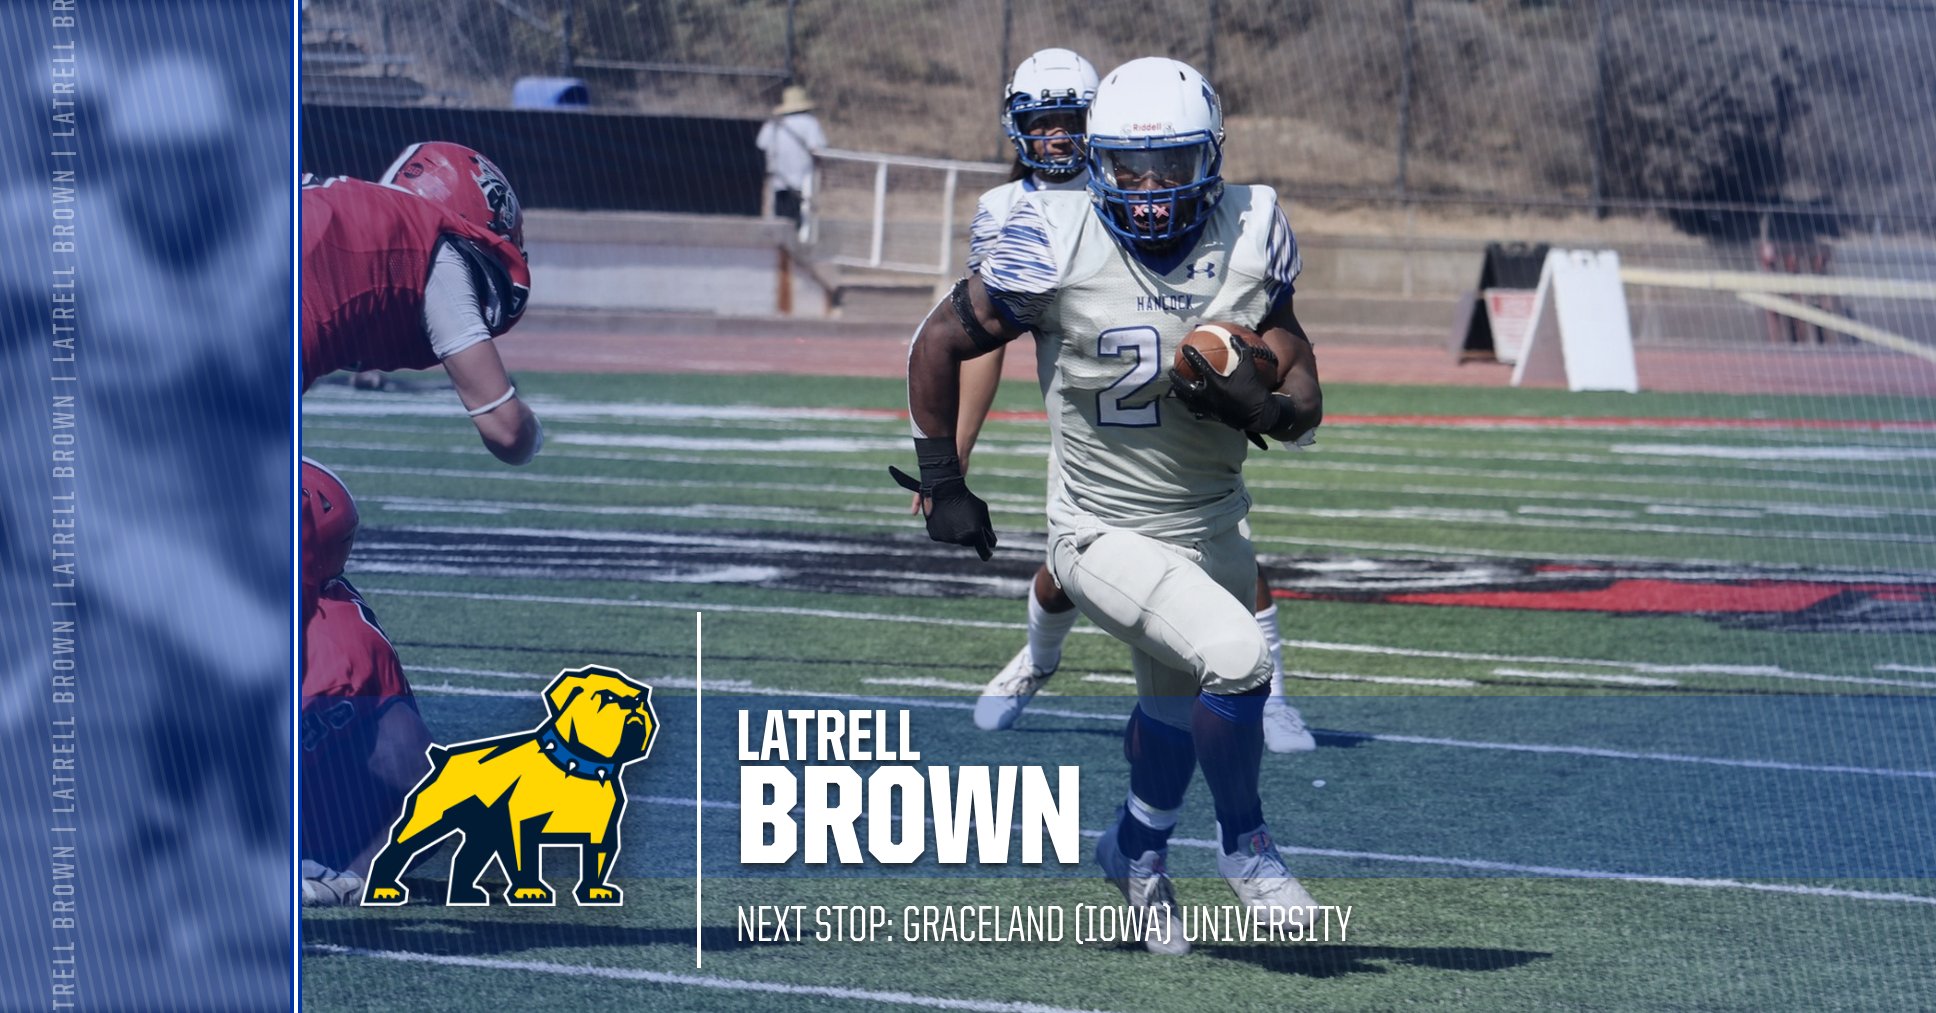 Football's Latrell Brown Commits to Graceland University